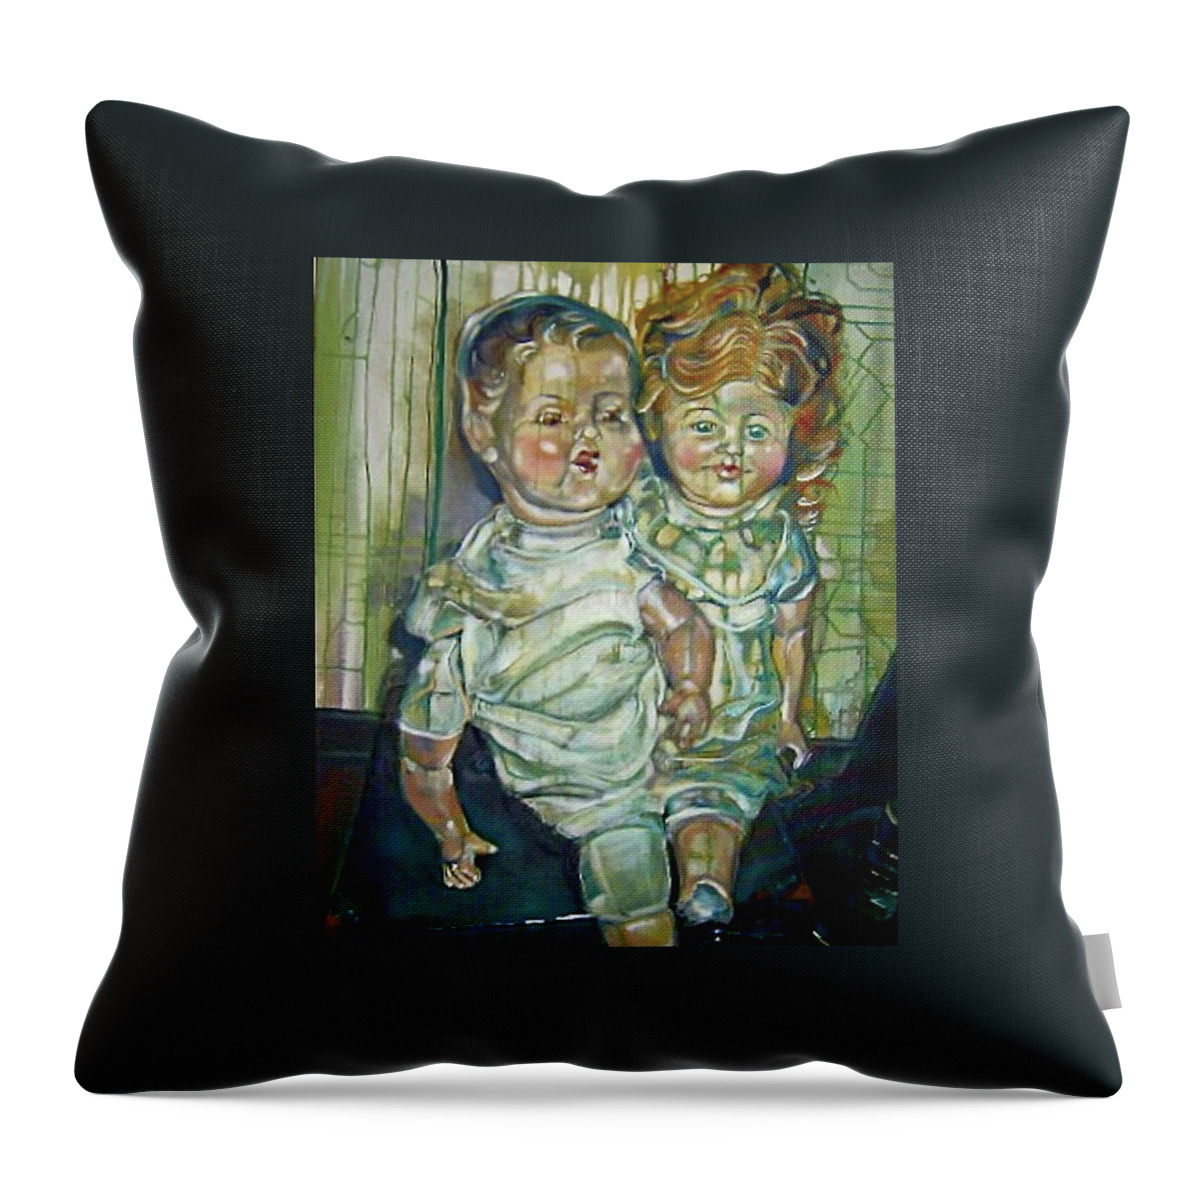  Throw Pillow featuring the painting Antique Dolls by Try Cheatham